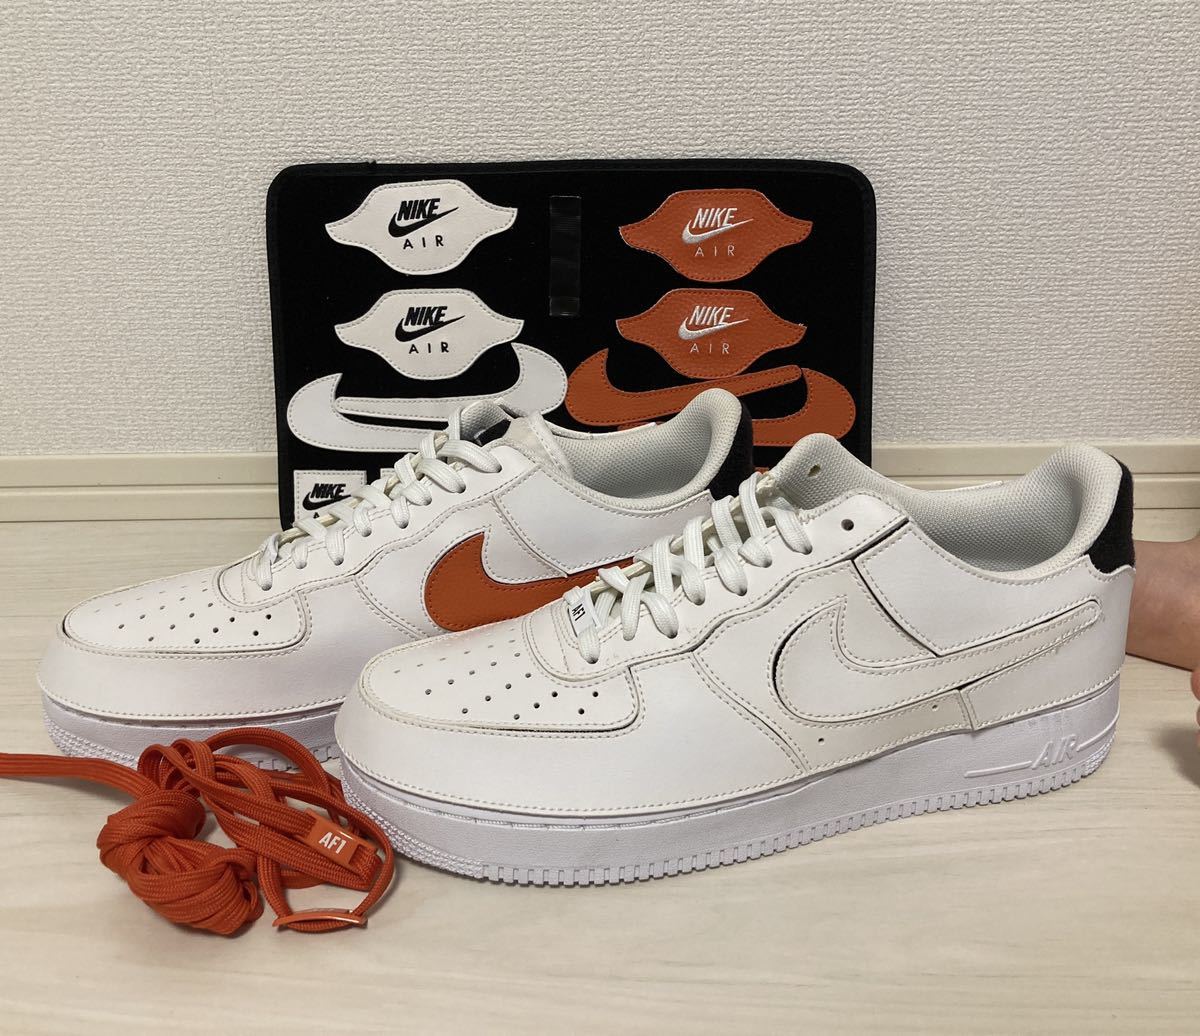 28.5cm NIKE AIR FORCE 1 LOW ナイキエアフォース1 cosmic clay US 10.5_画像1